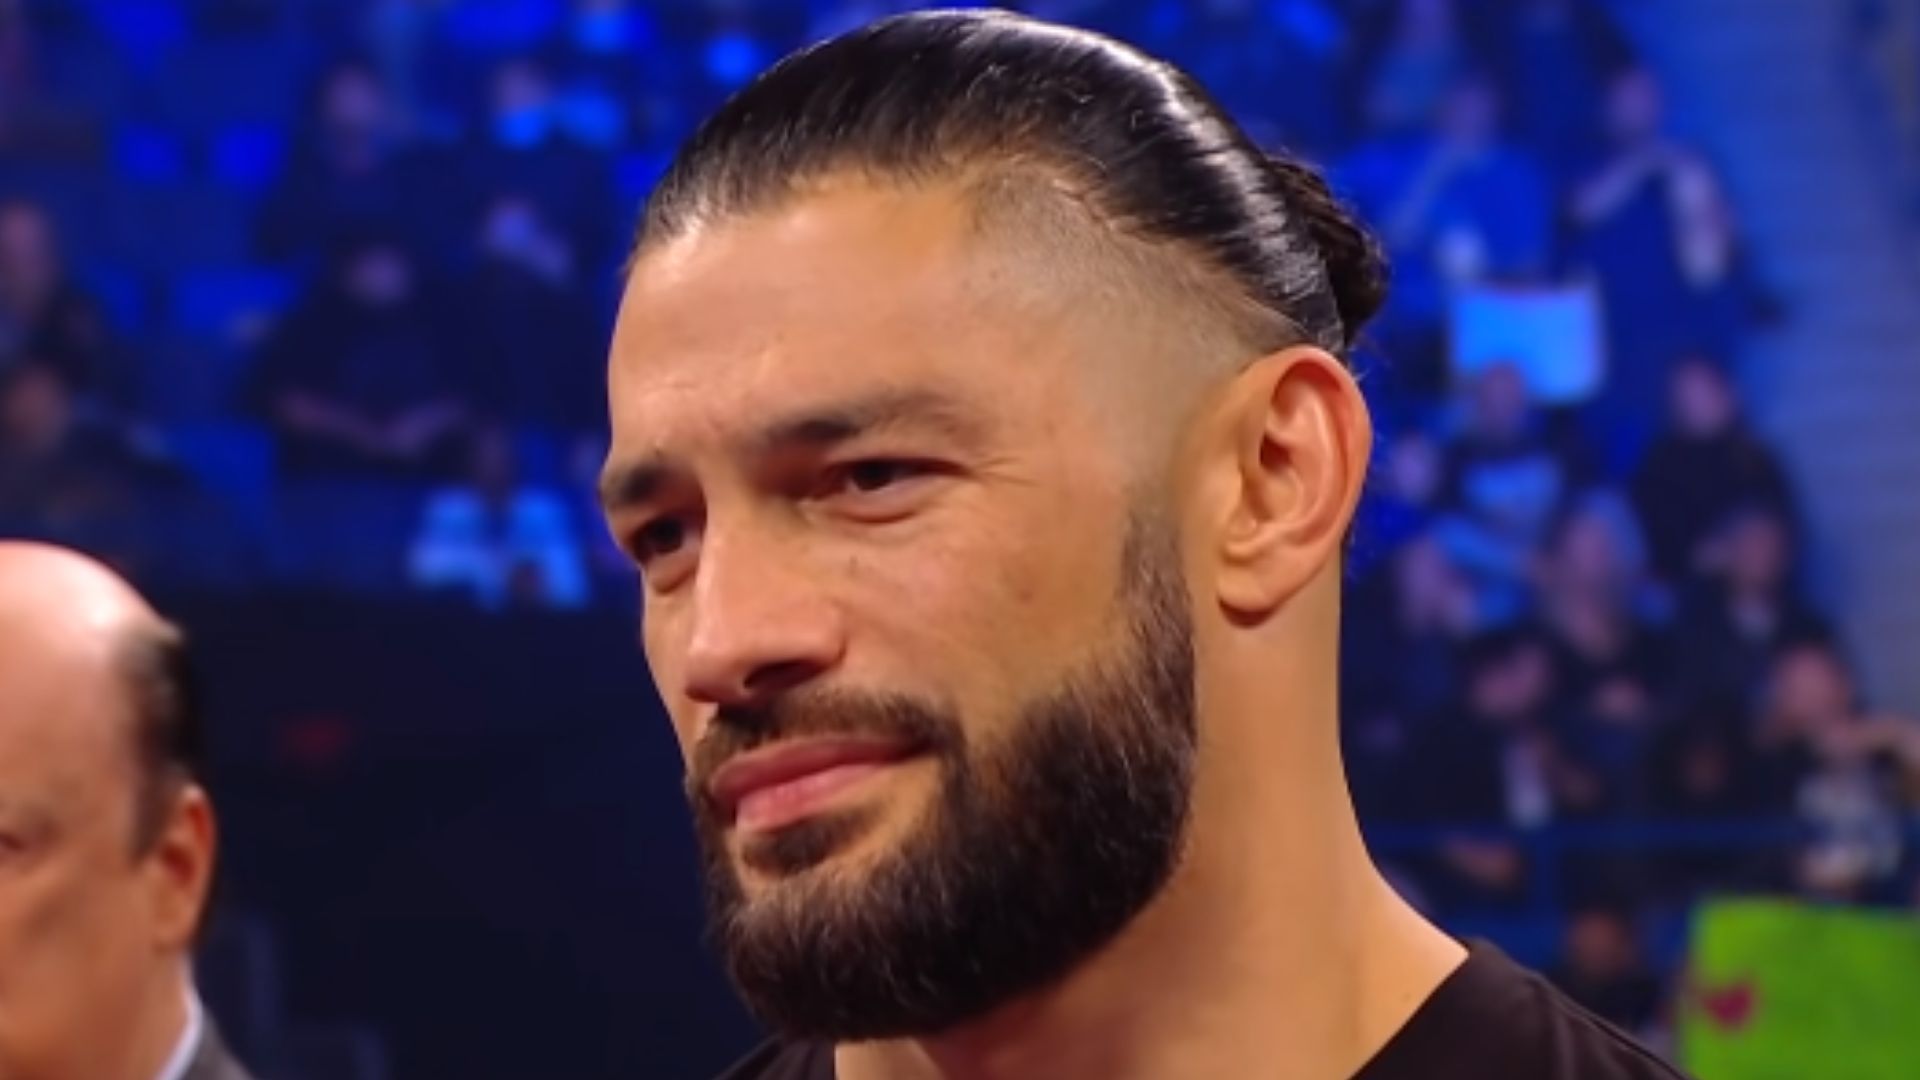 Roman Reigns is the current Undisputed WWE Universal Champion.